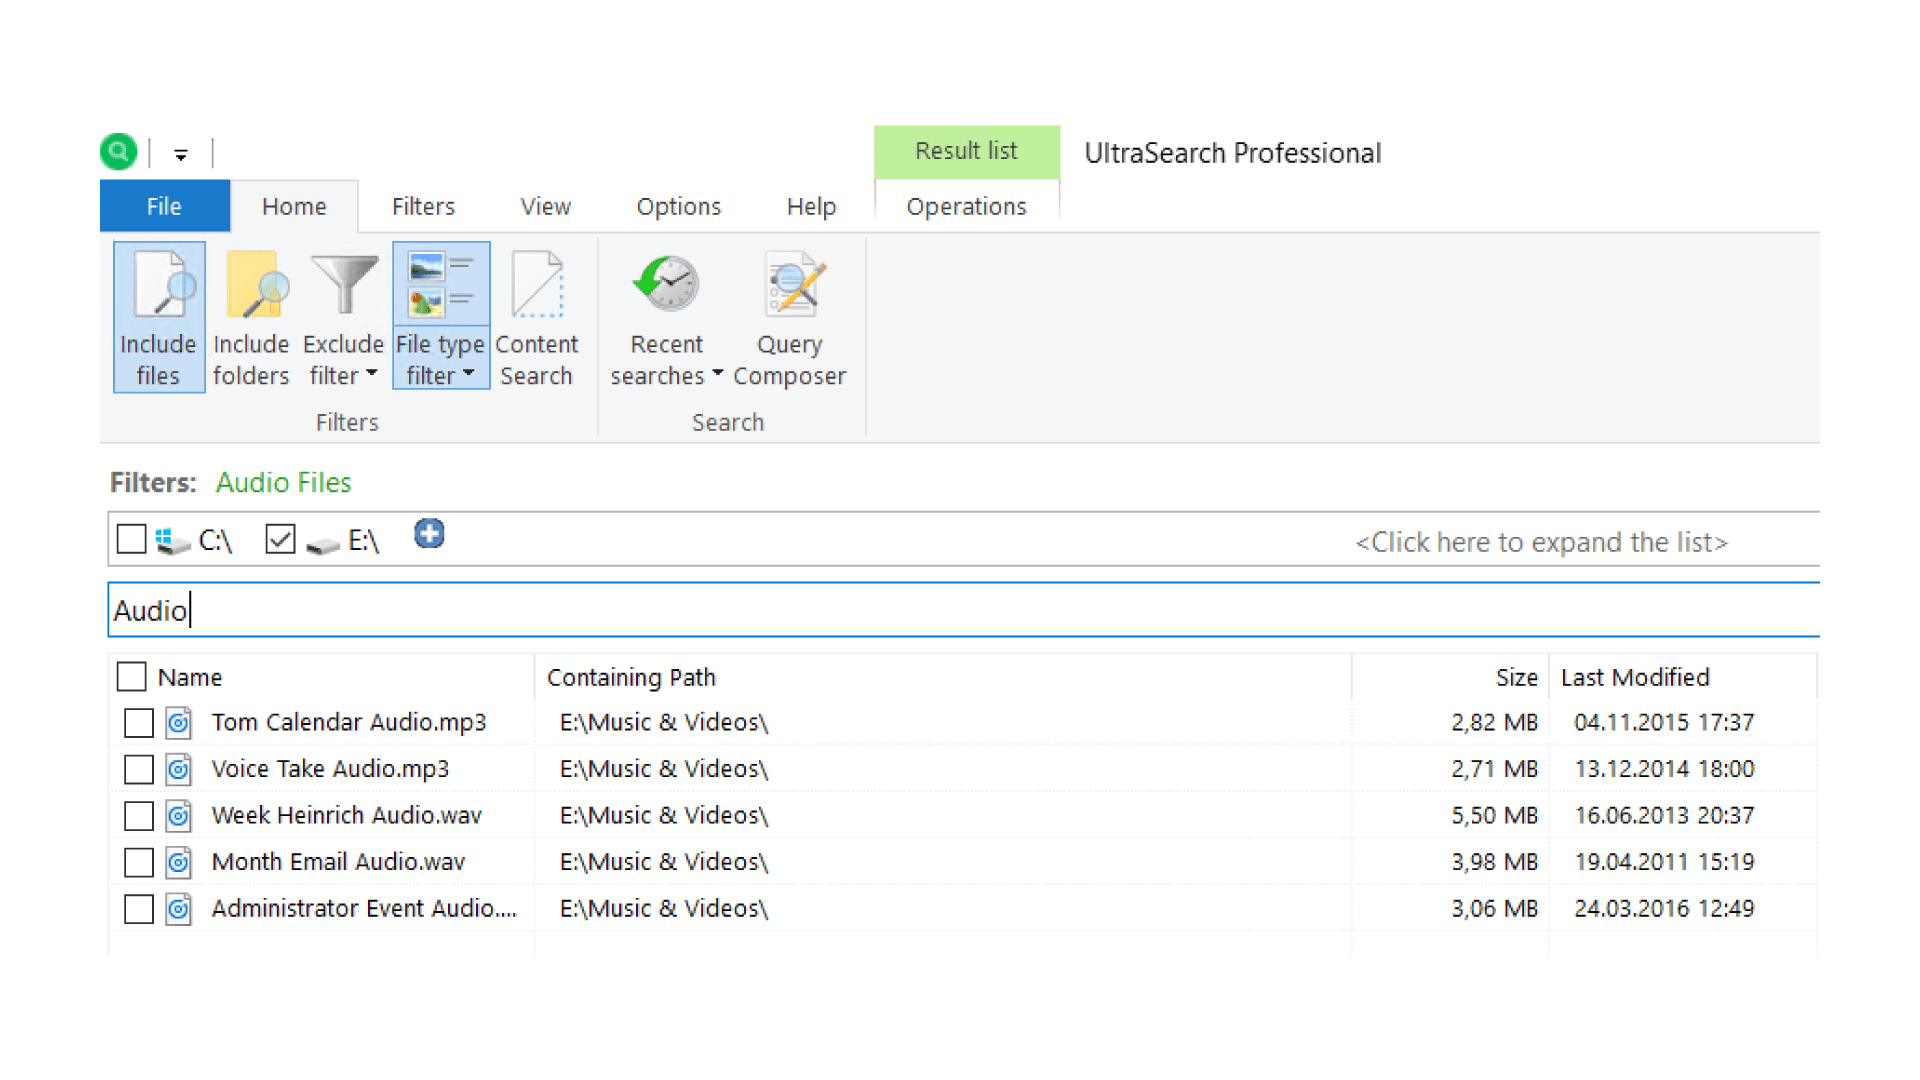 UltraSearch Professional file type filters